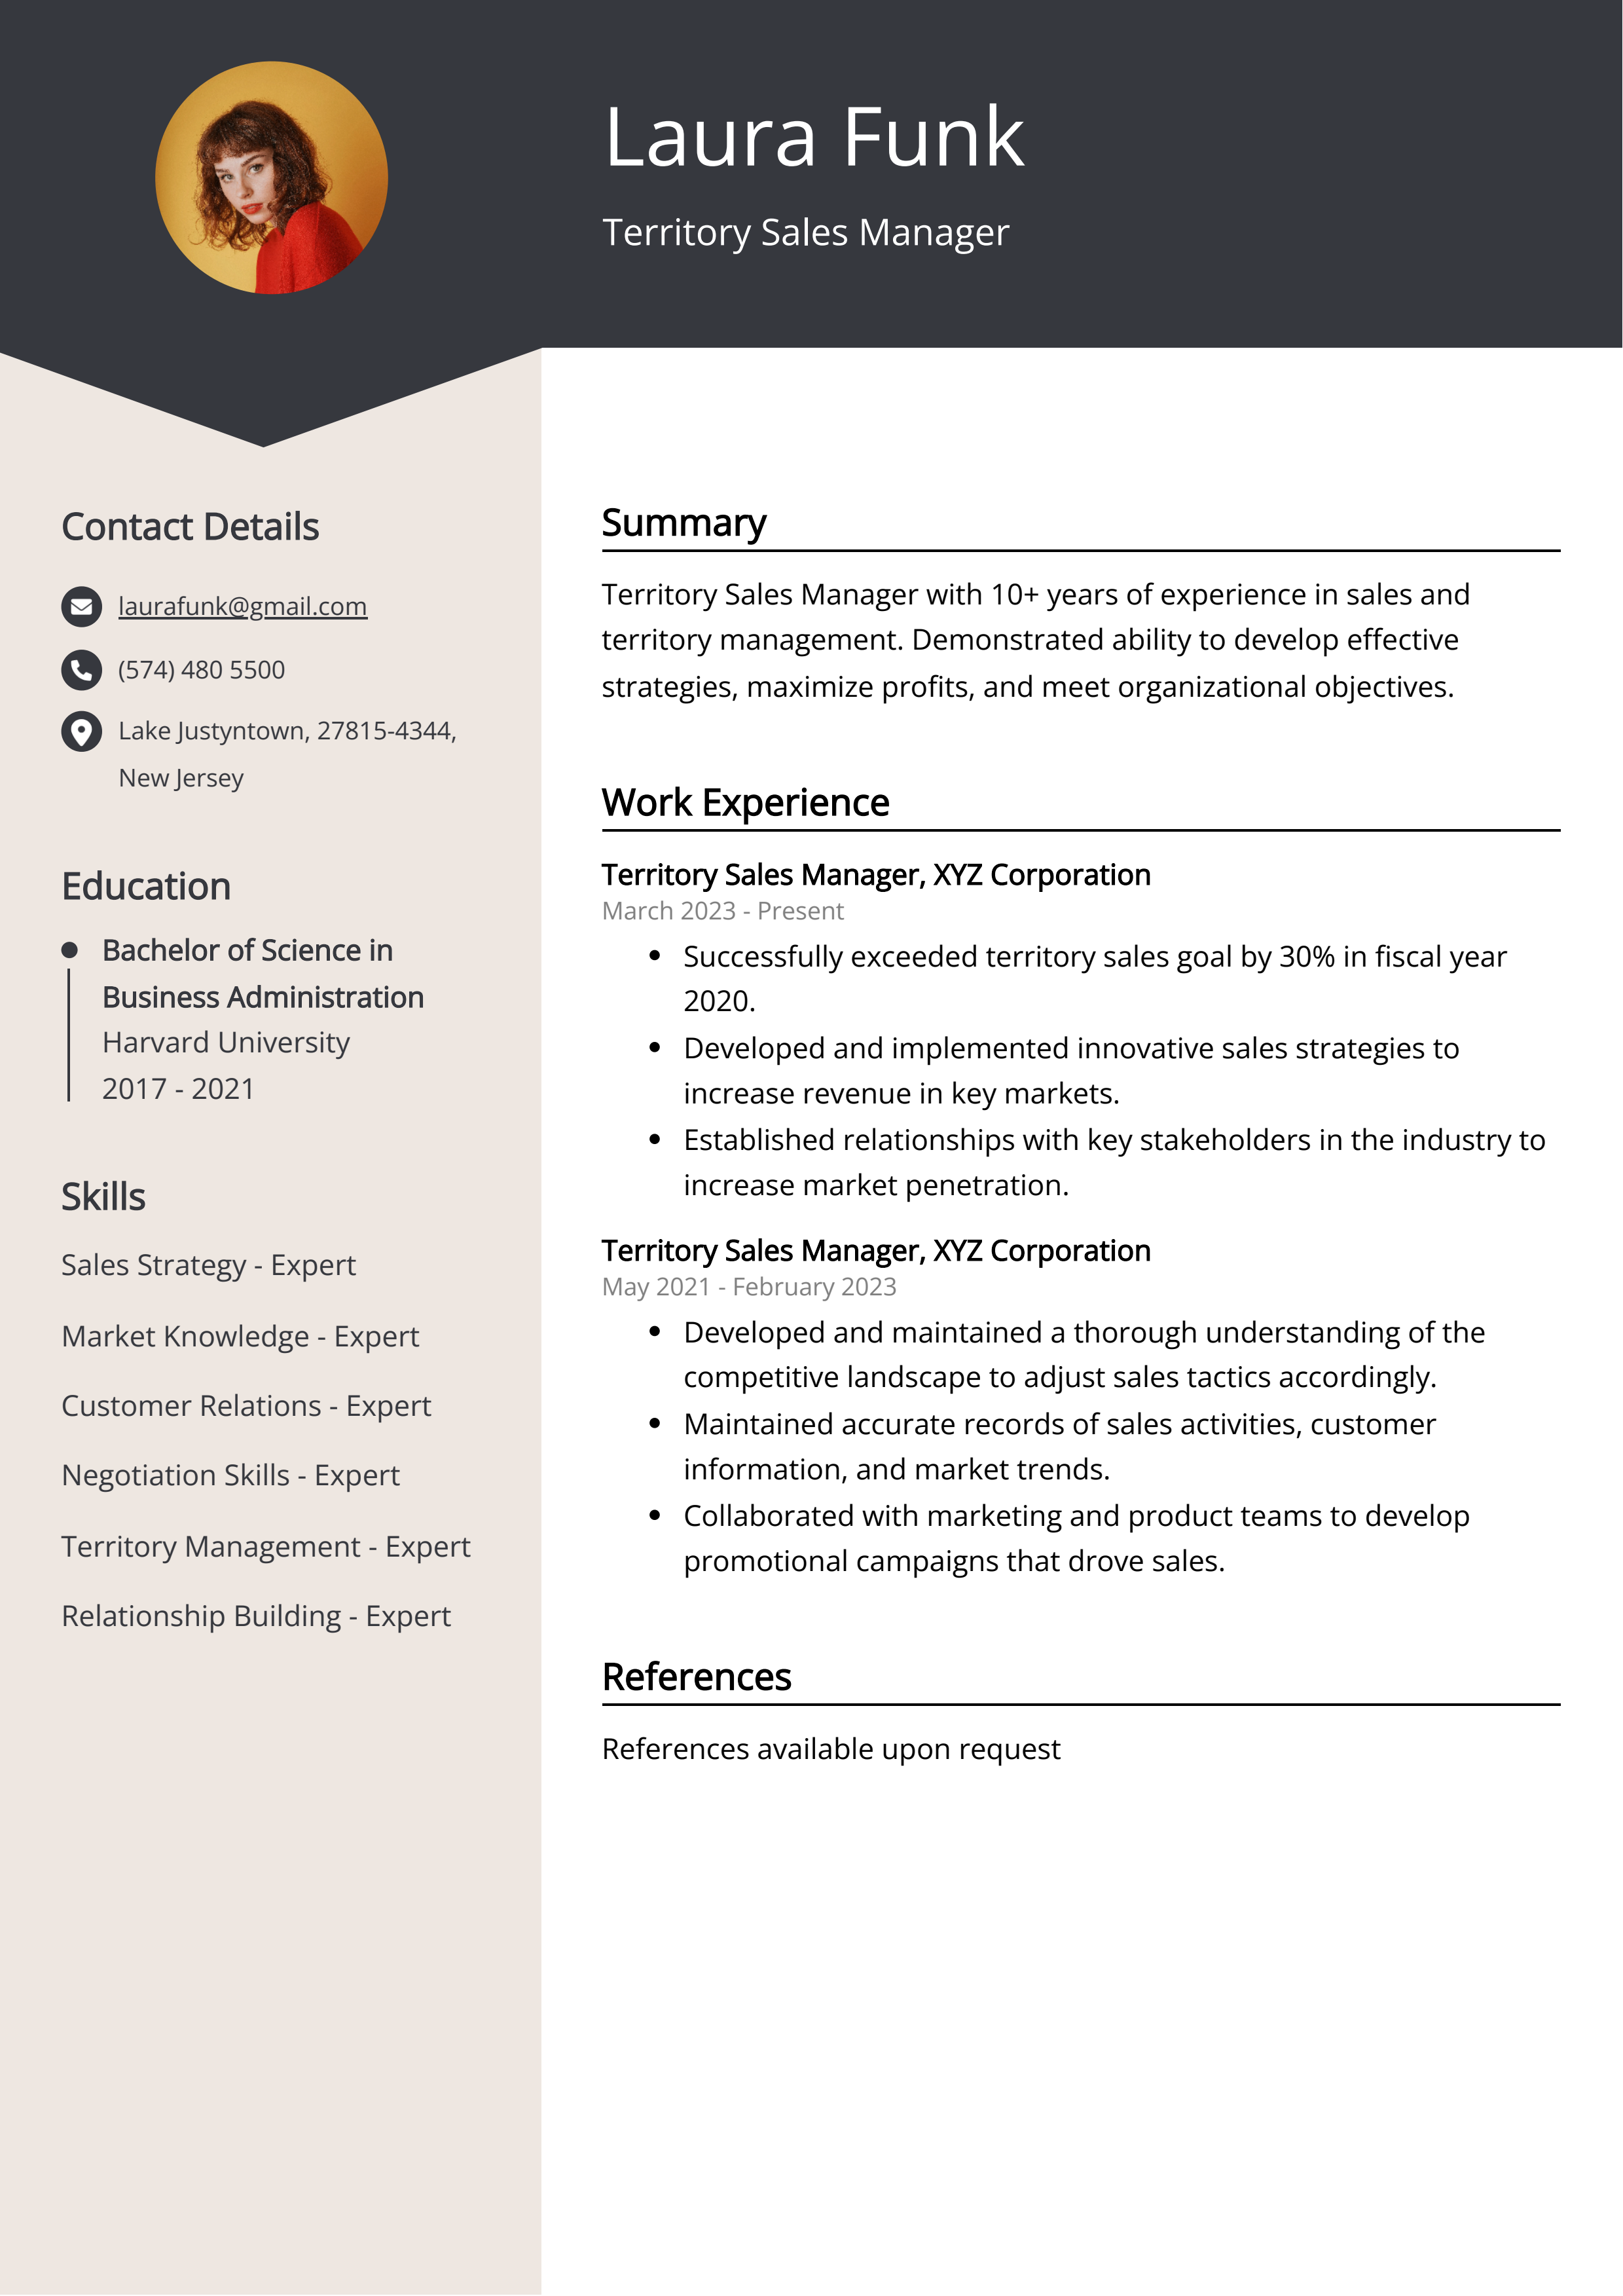 Territory Sales Manager CV Example